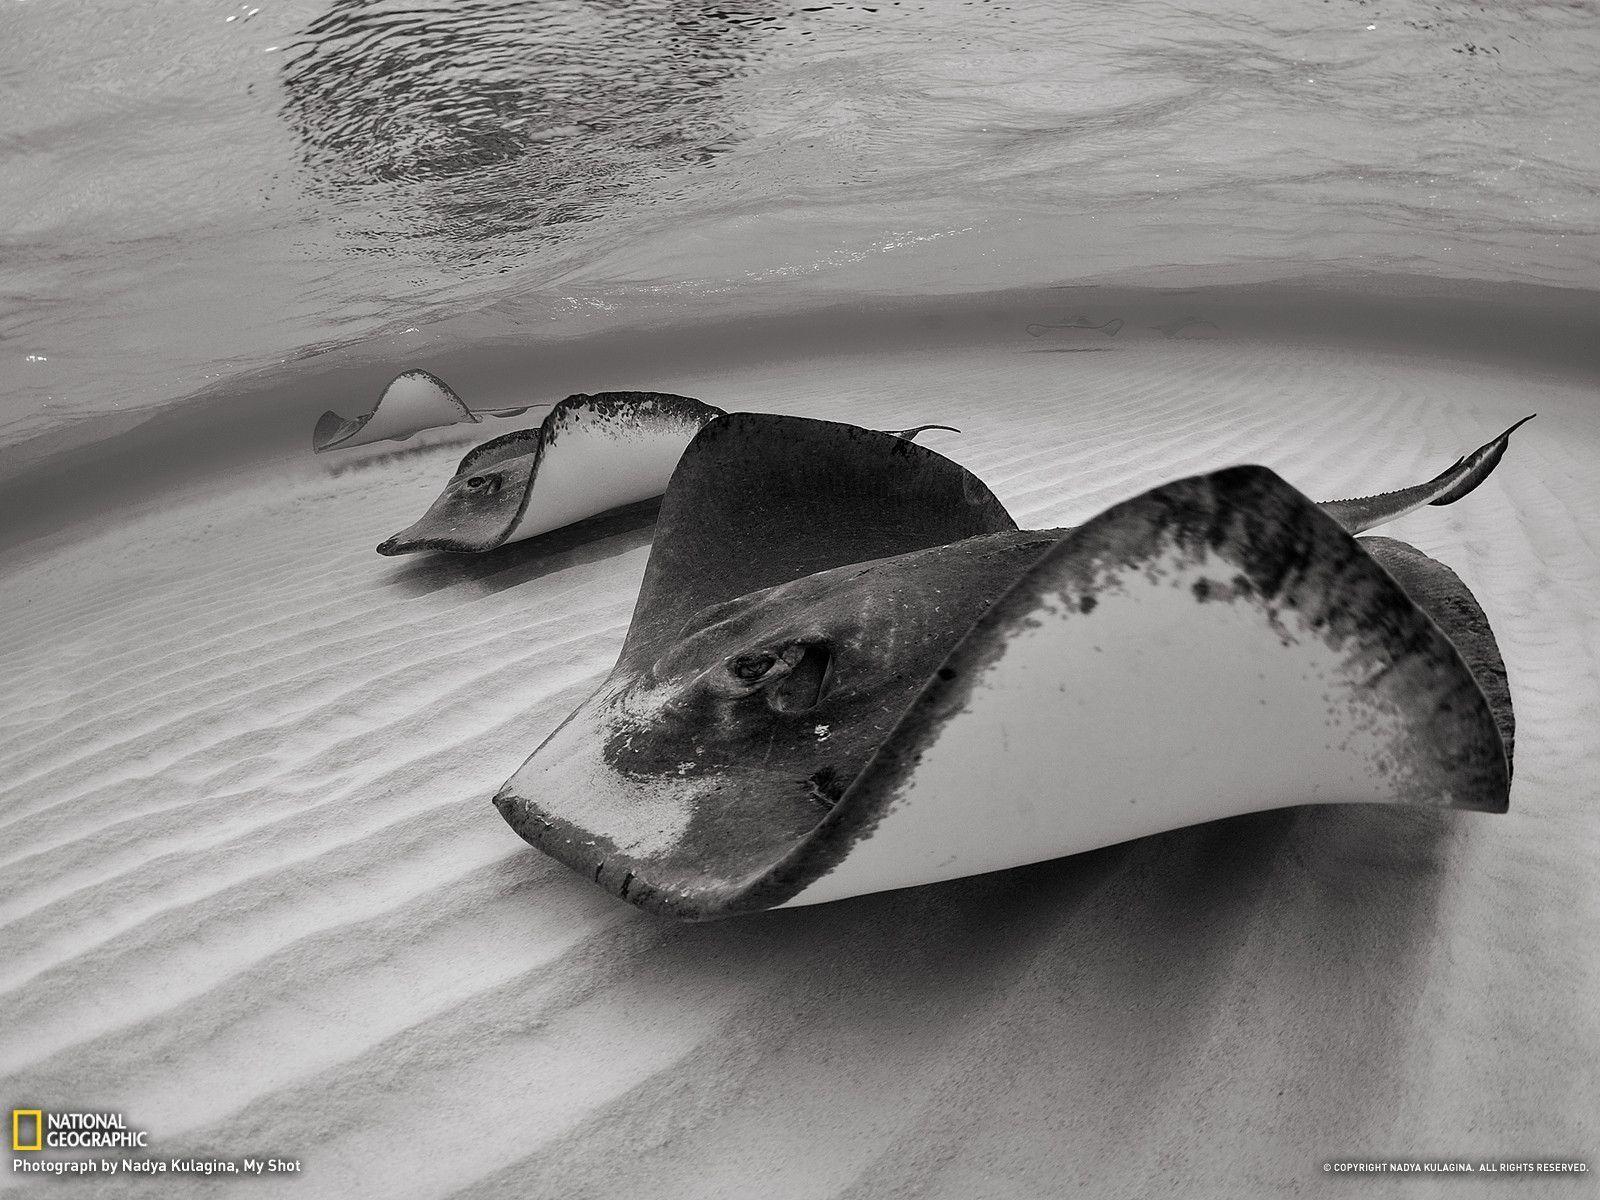 Stingray Picture - Underwater Wallpaper - National Geographic